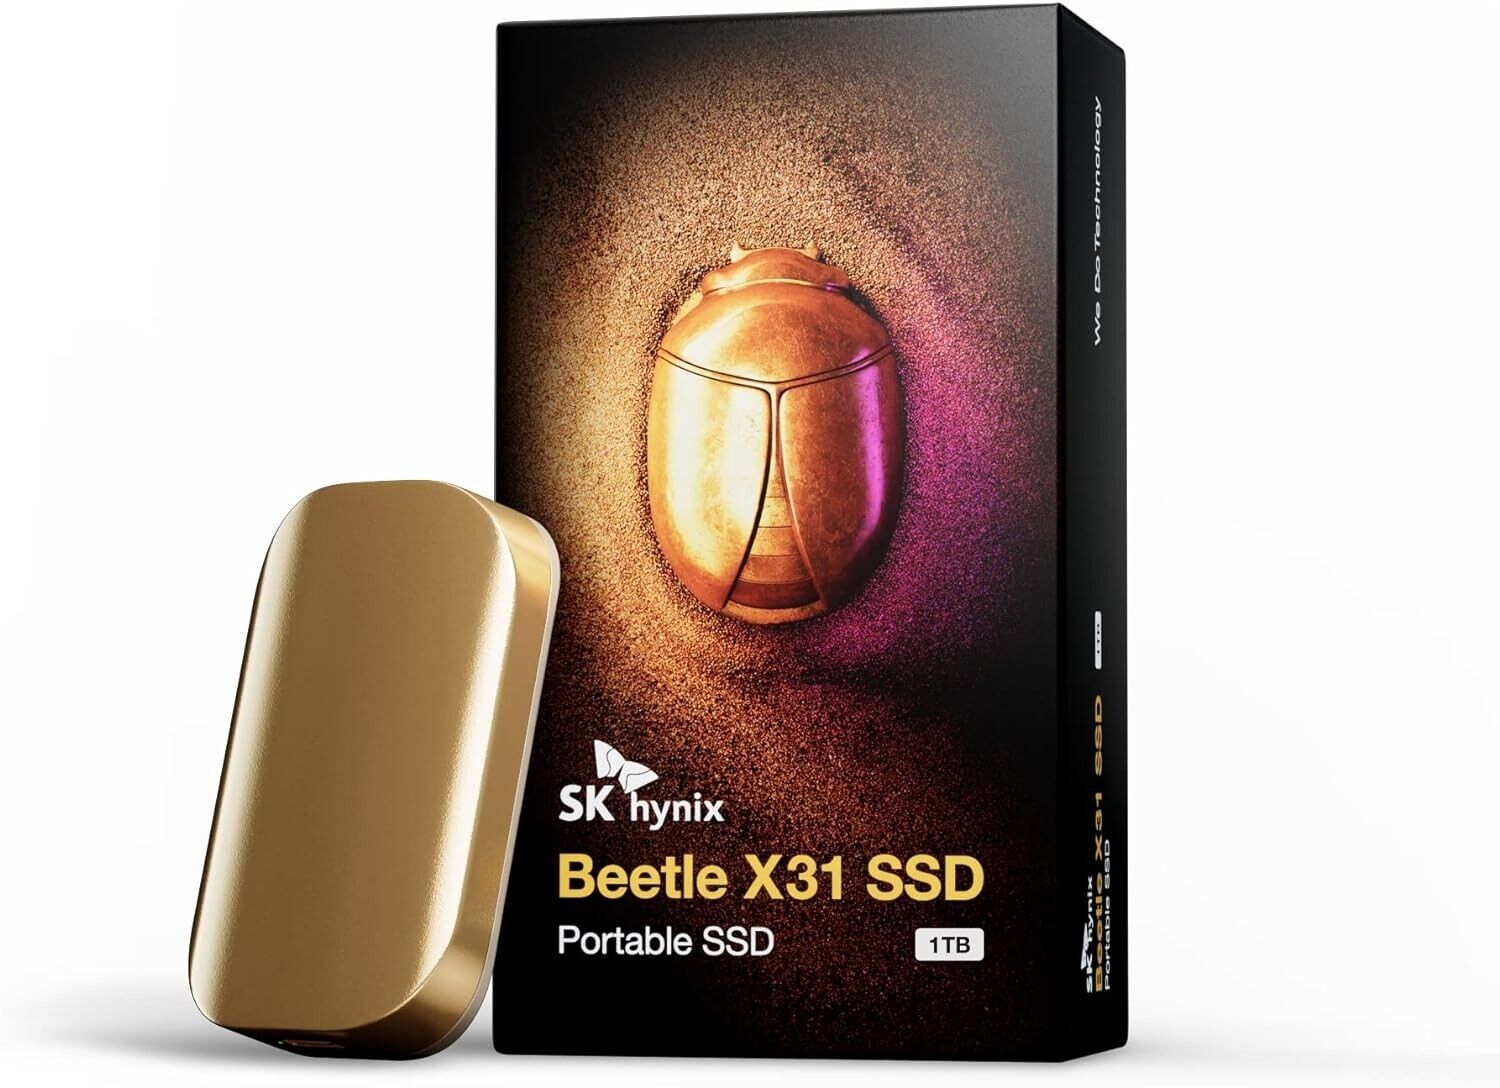 SK hynix Beetle X31 1TB Portable SSD with DRAM, up to 1050MB/s, USB 3.2 Gen2